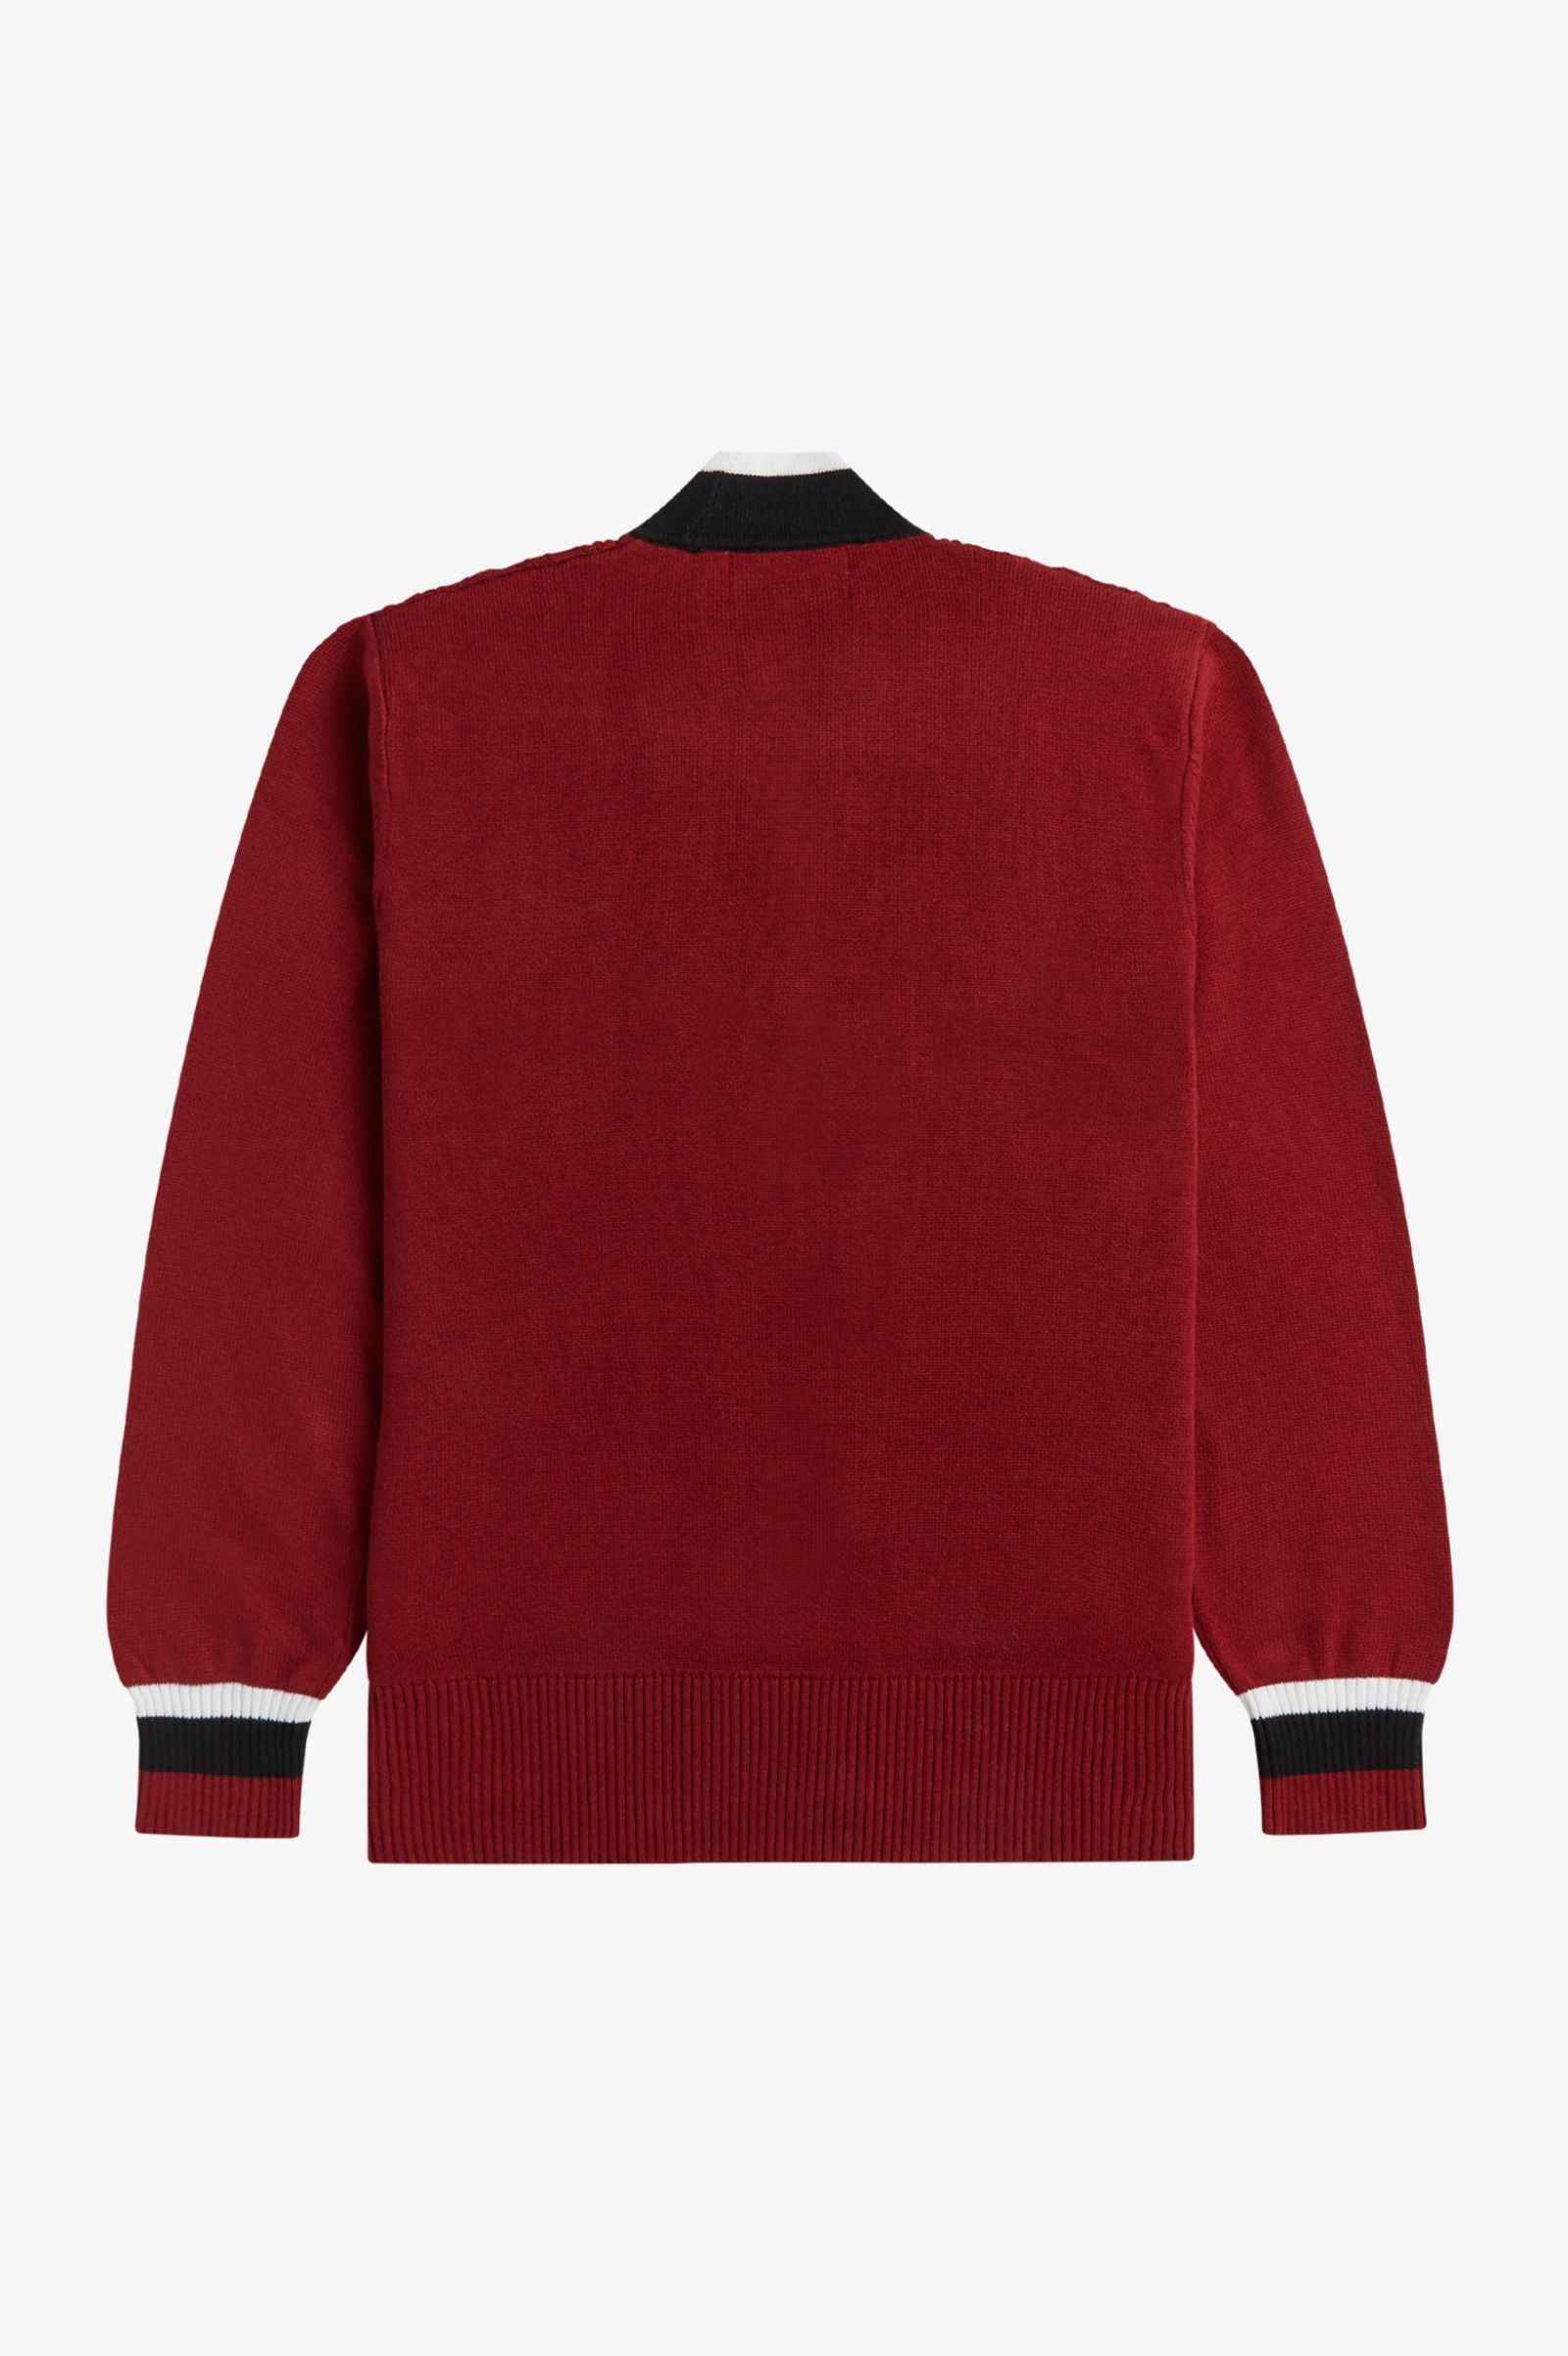 CASELY-HAYFORD CABLE KNIT CARDIGAN